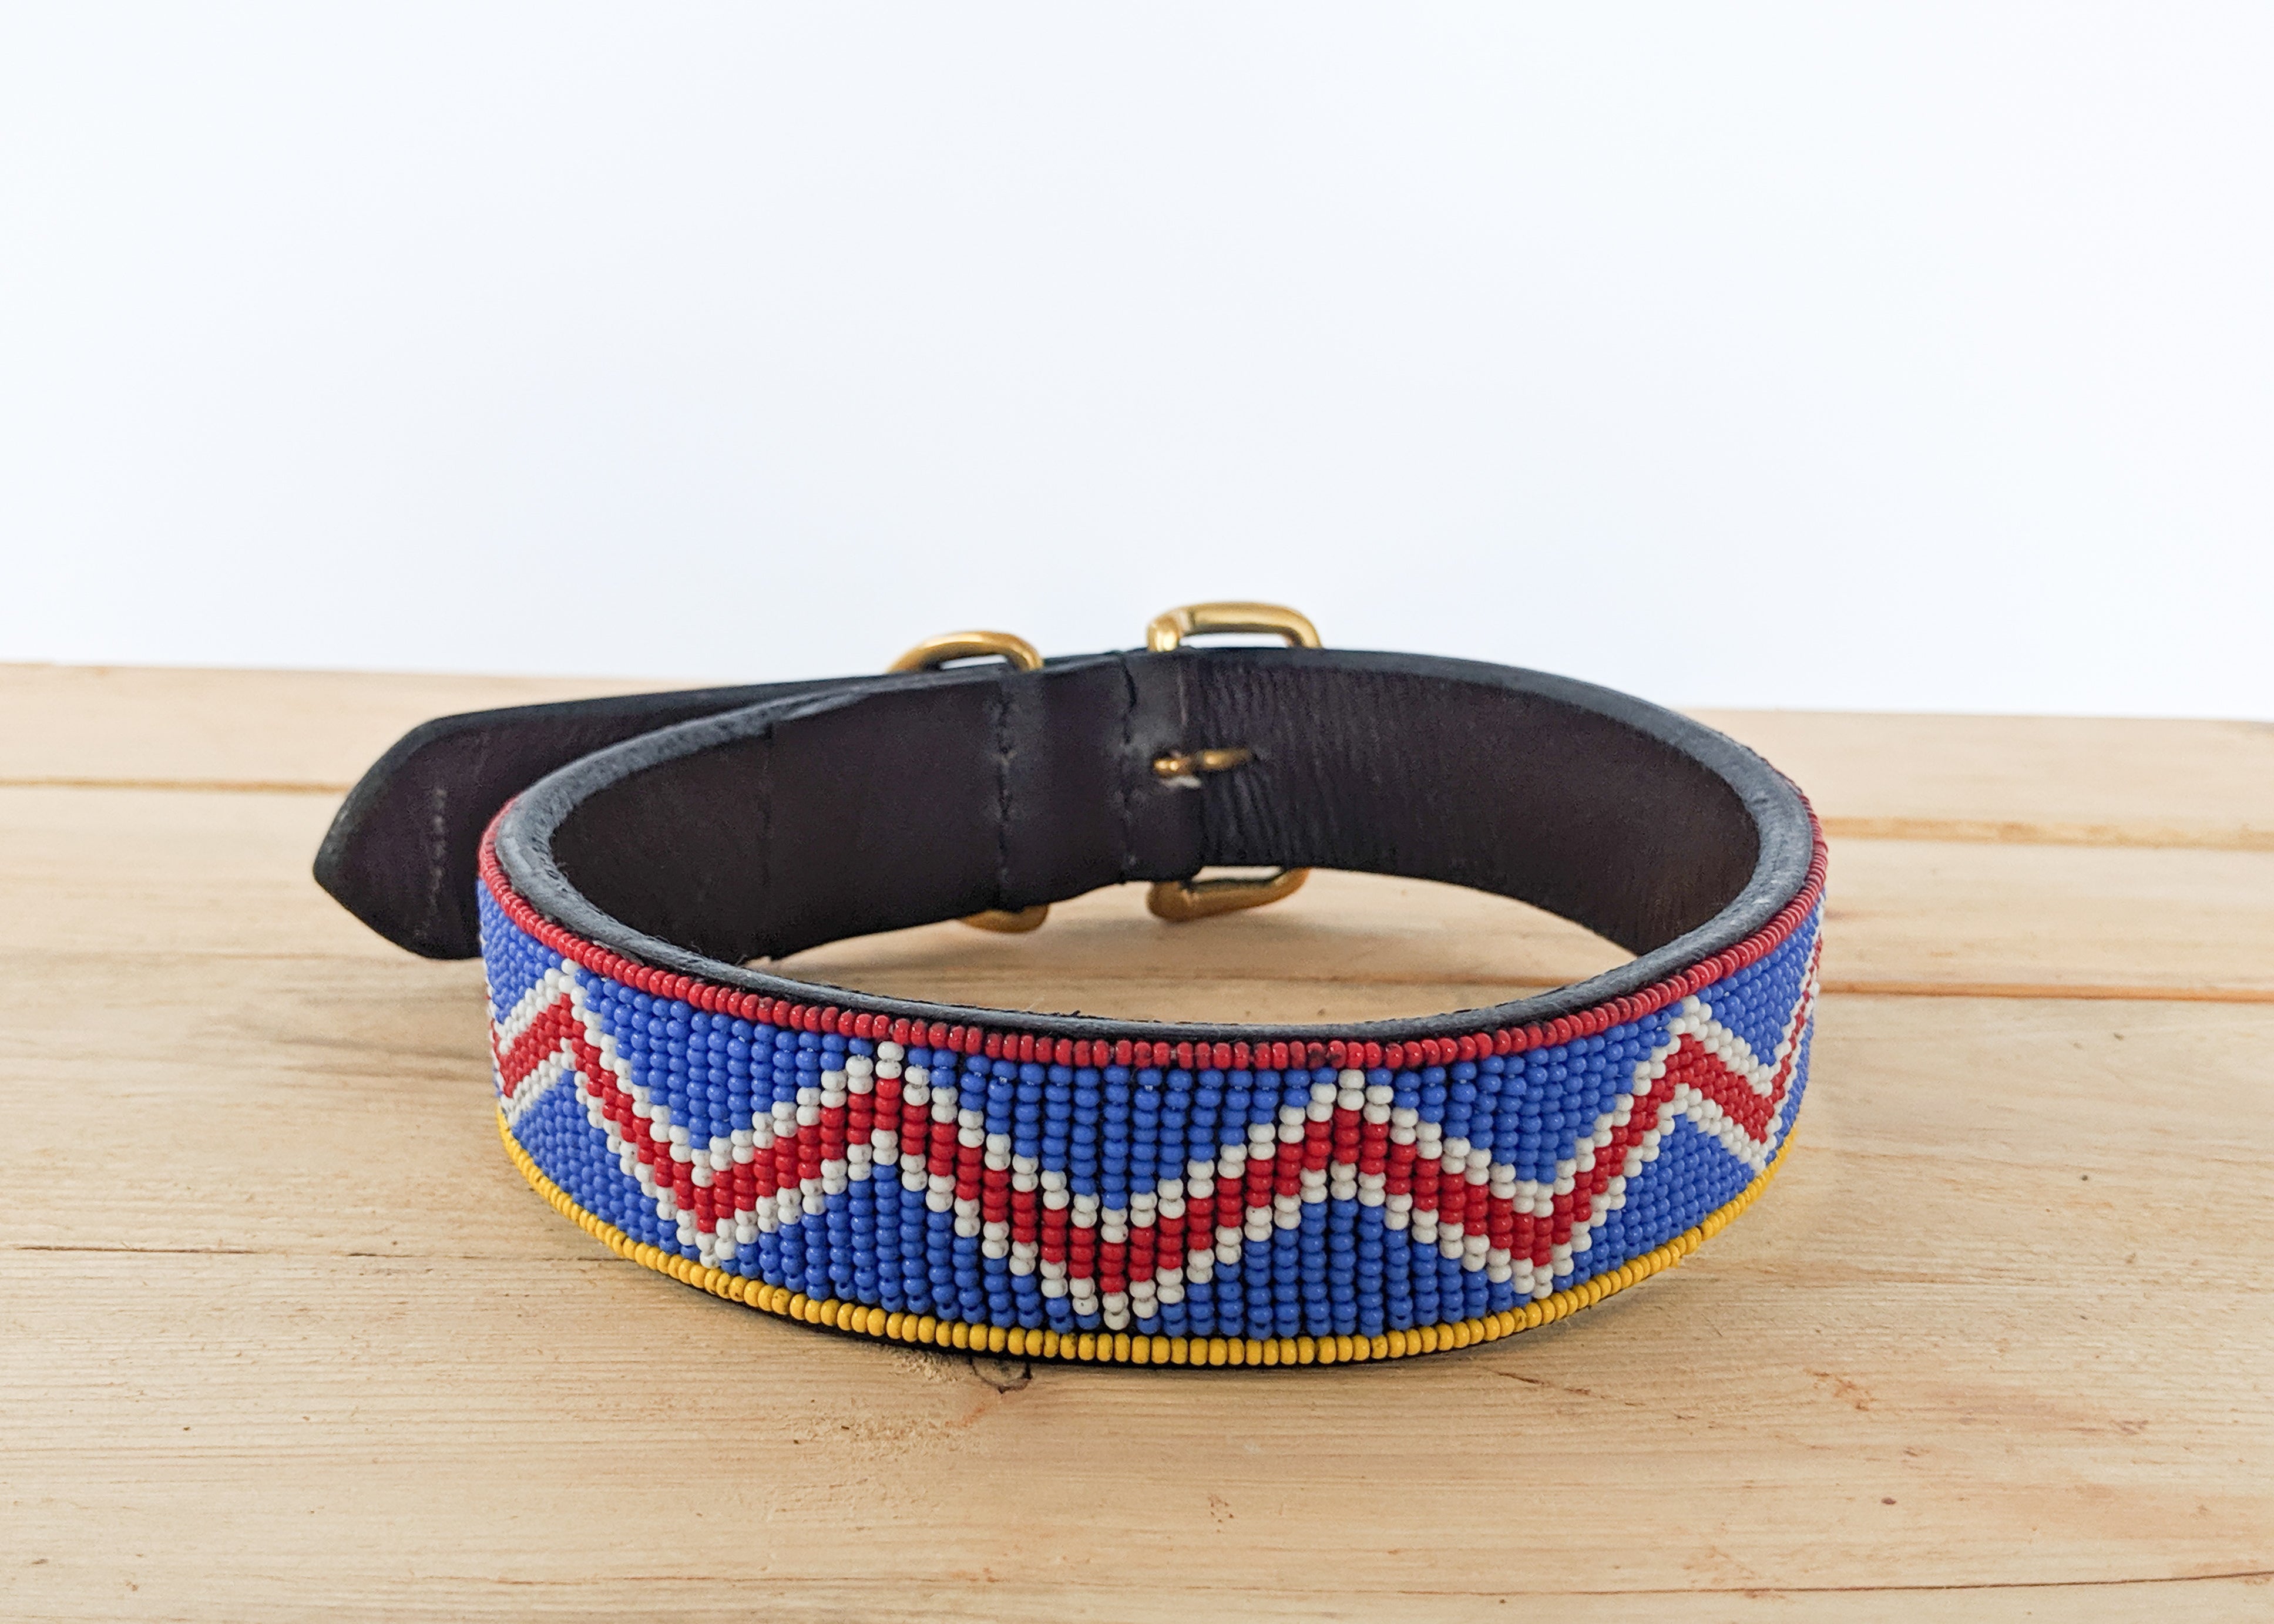 Blue and red Masai beaded dog collar